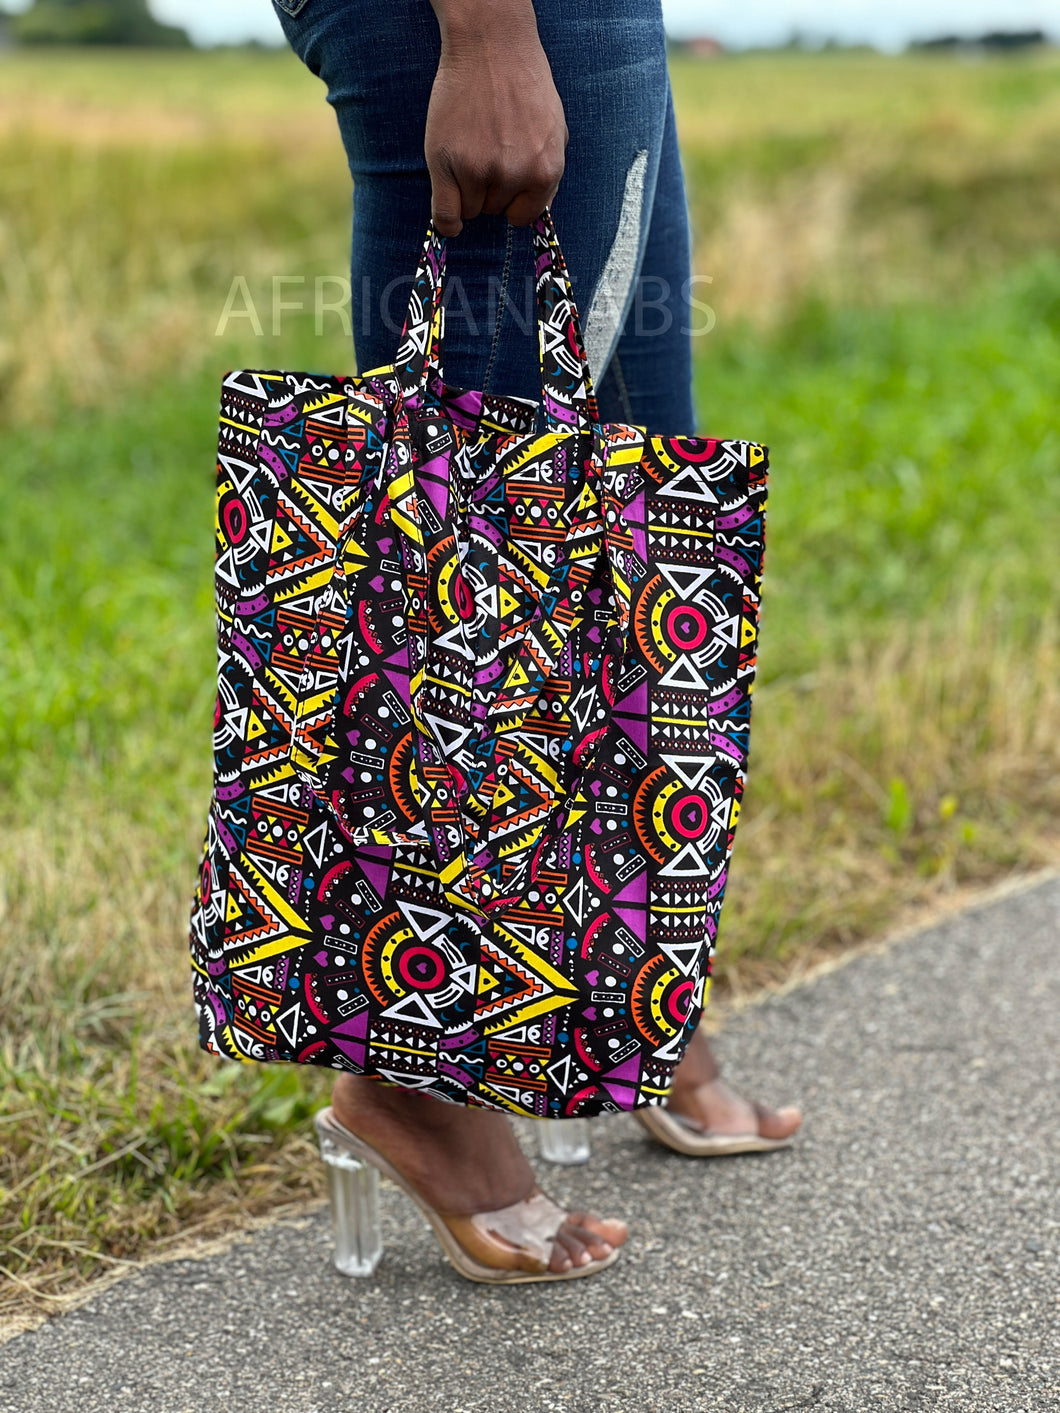 Shopper bag with African print - Pink / yellow tribal - Reusable Shopping Bag made of cotton